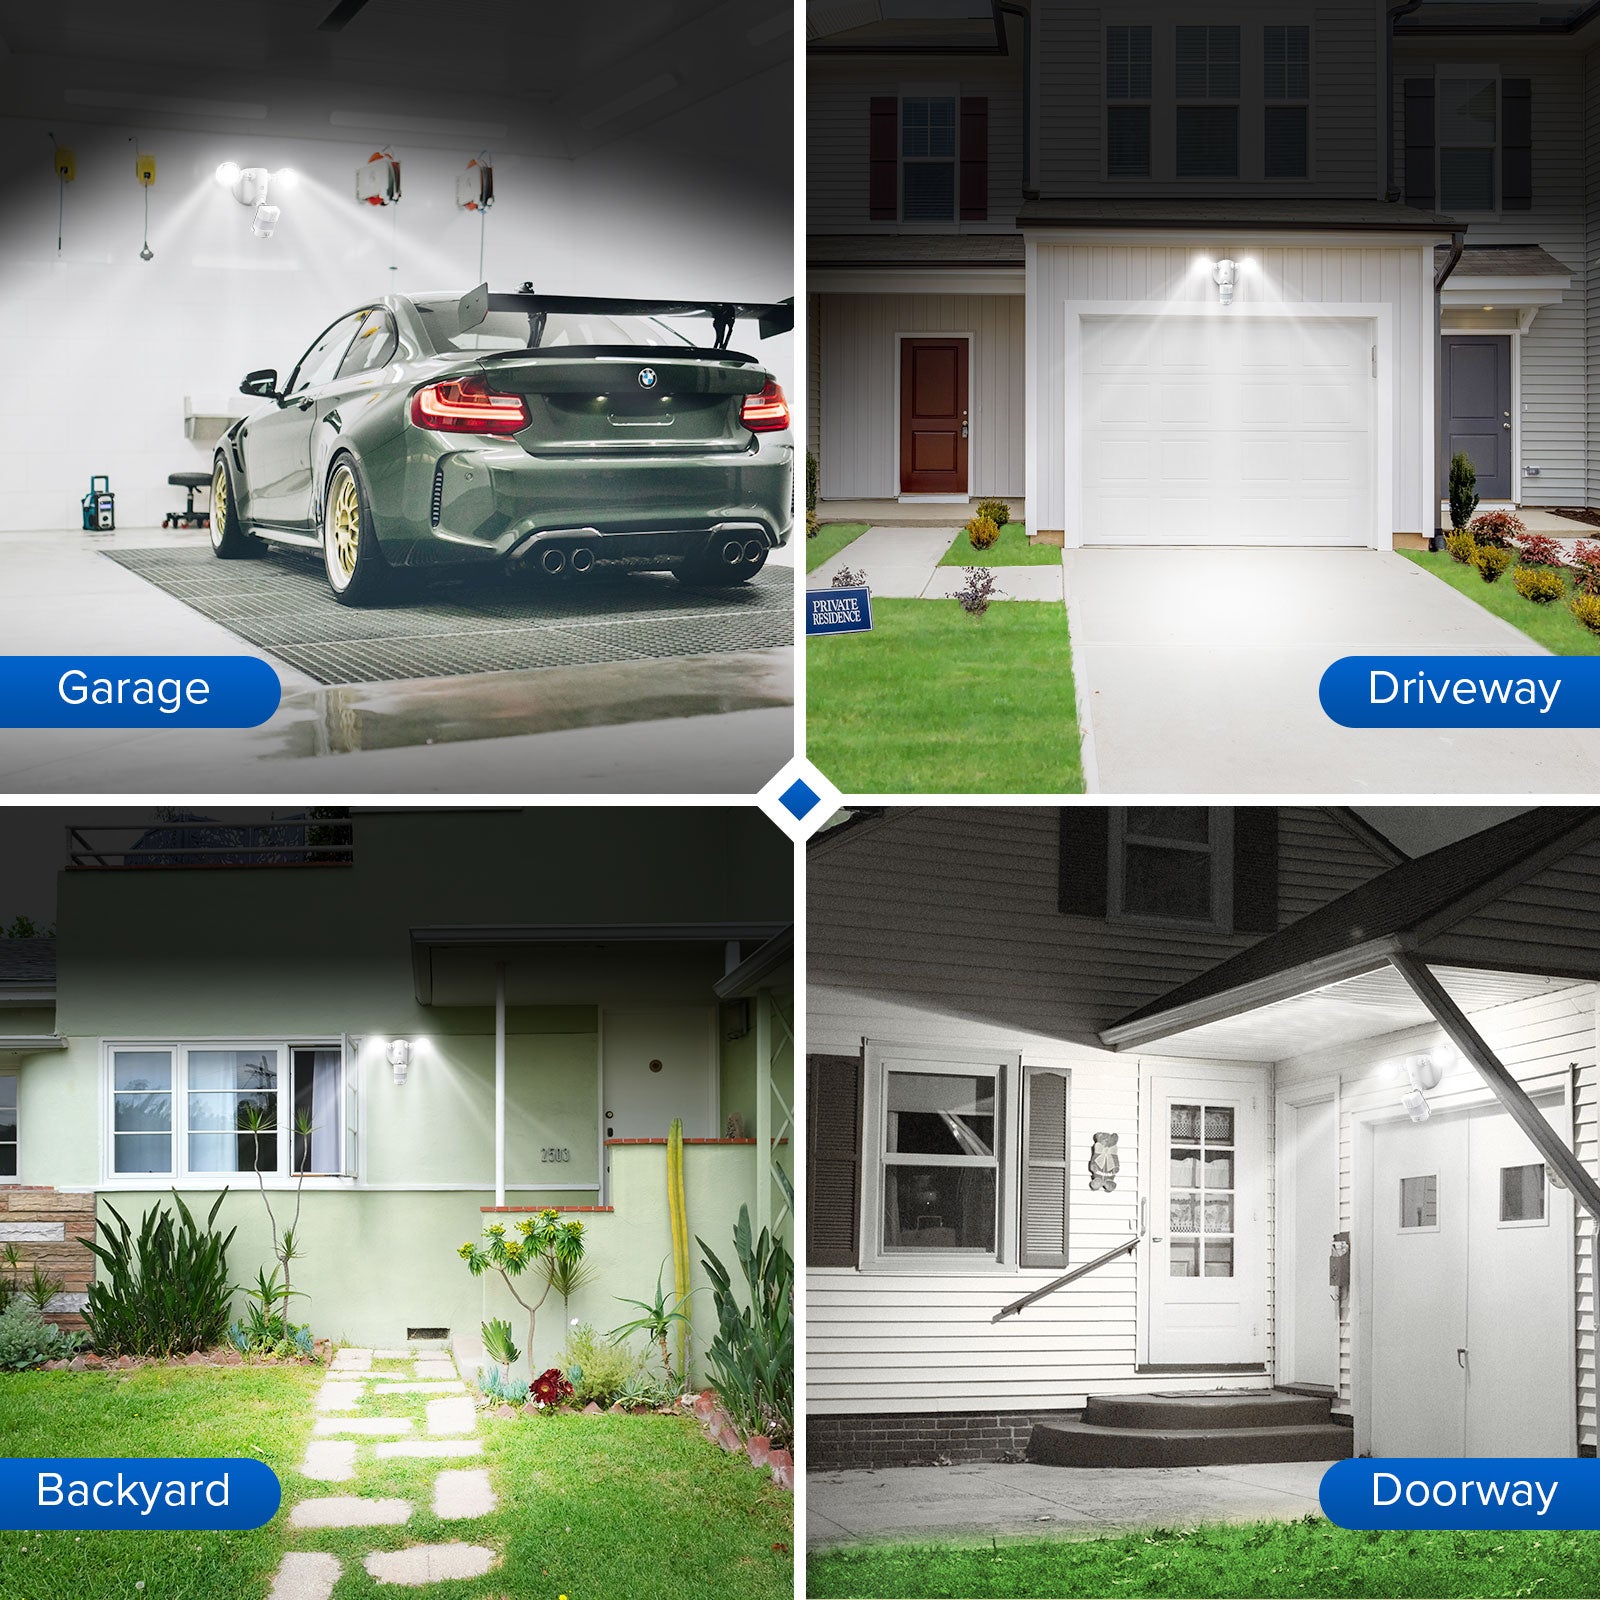 15W LED Security Light (Dusk to Dawn & Motion Sensor) is suitable for garage, driveway, backyard and doorway